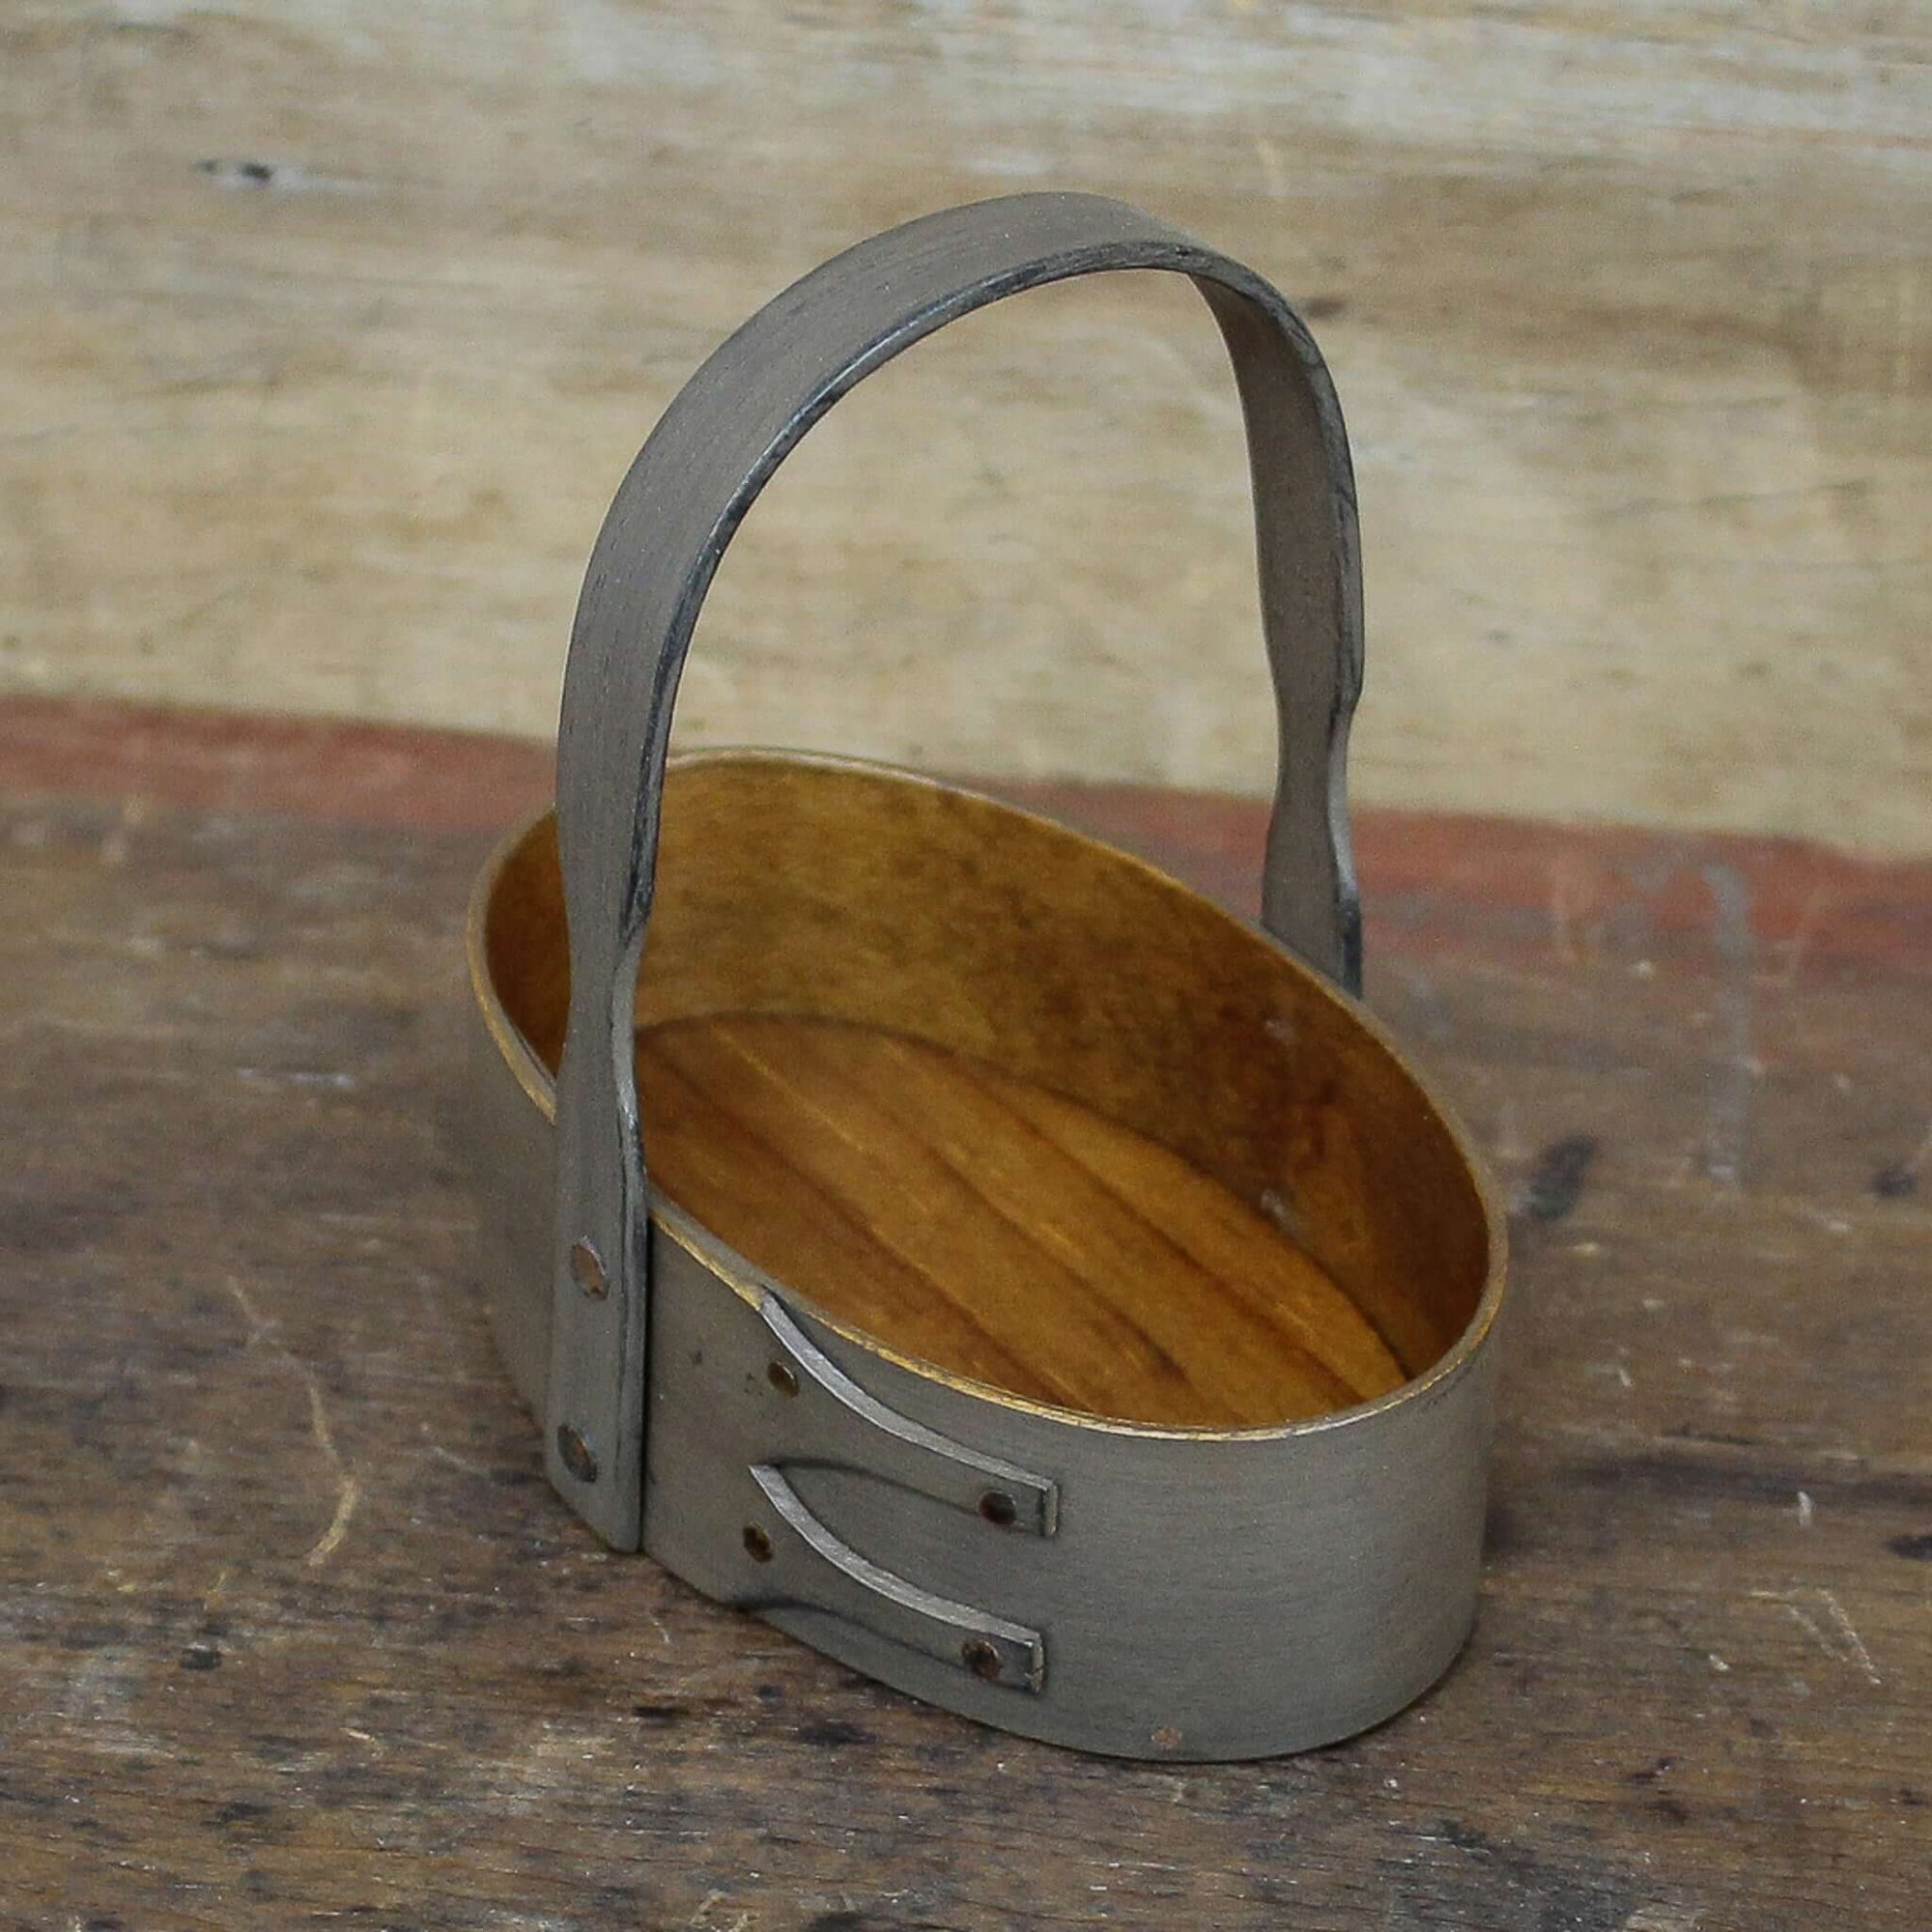 Shaker Oval Carrier, LeHay's Shaker Boxes